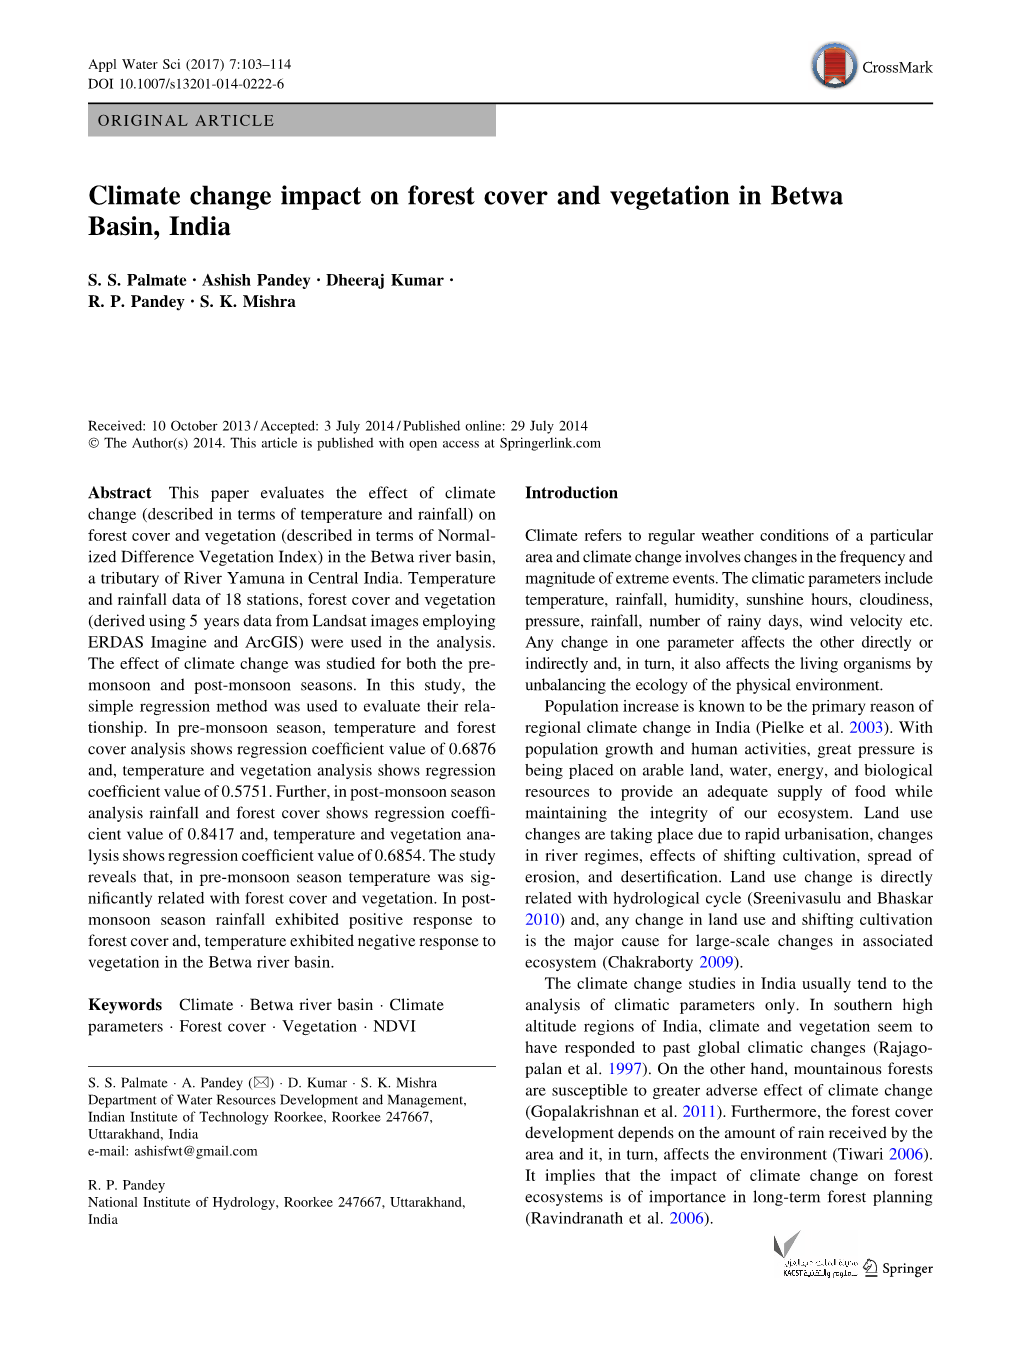 Climate Change Impact on Forest Cover and Vegetation in Betwa Basin, India